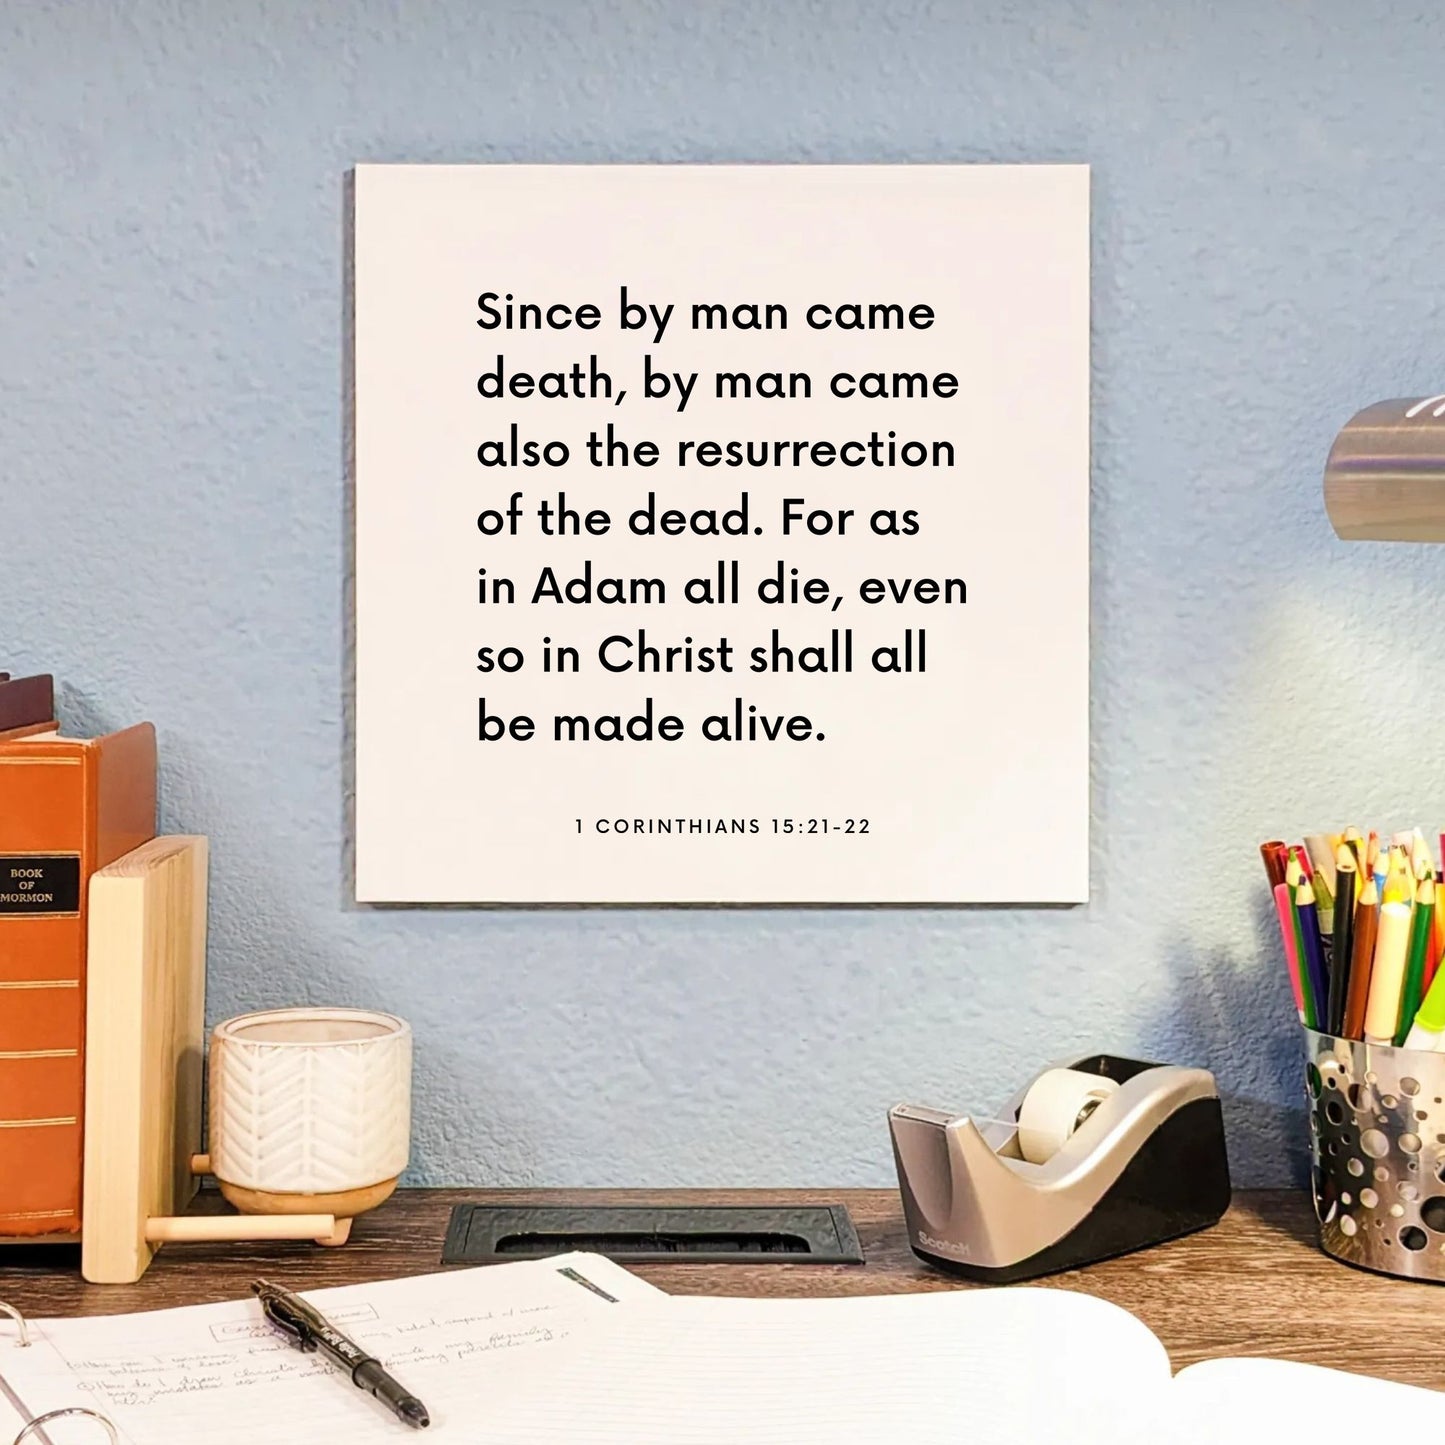 Desk mouting of the scripture tile for 1 Corinthians 15:21-22 - "Since by man came death, by man came also the resurrection"